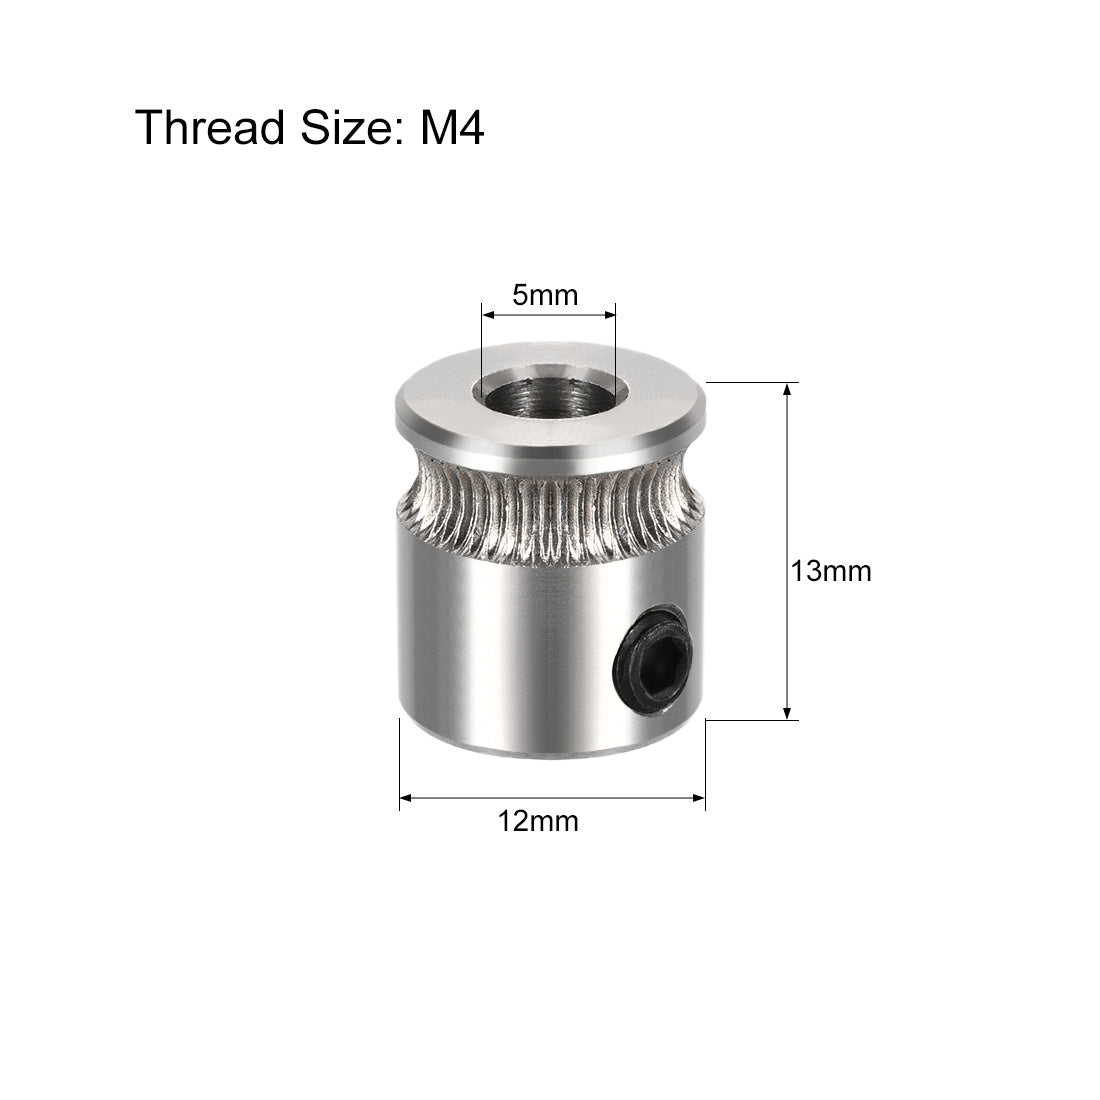 uxcell Uxcell MK7 Drive Gear Direct Extruder Drive 5mm Bore for Extruder 2pcs